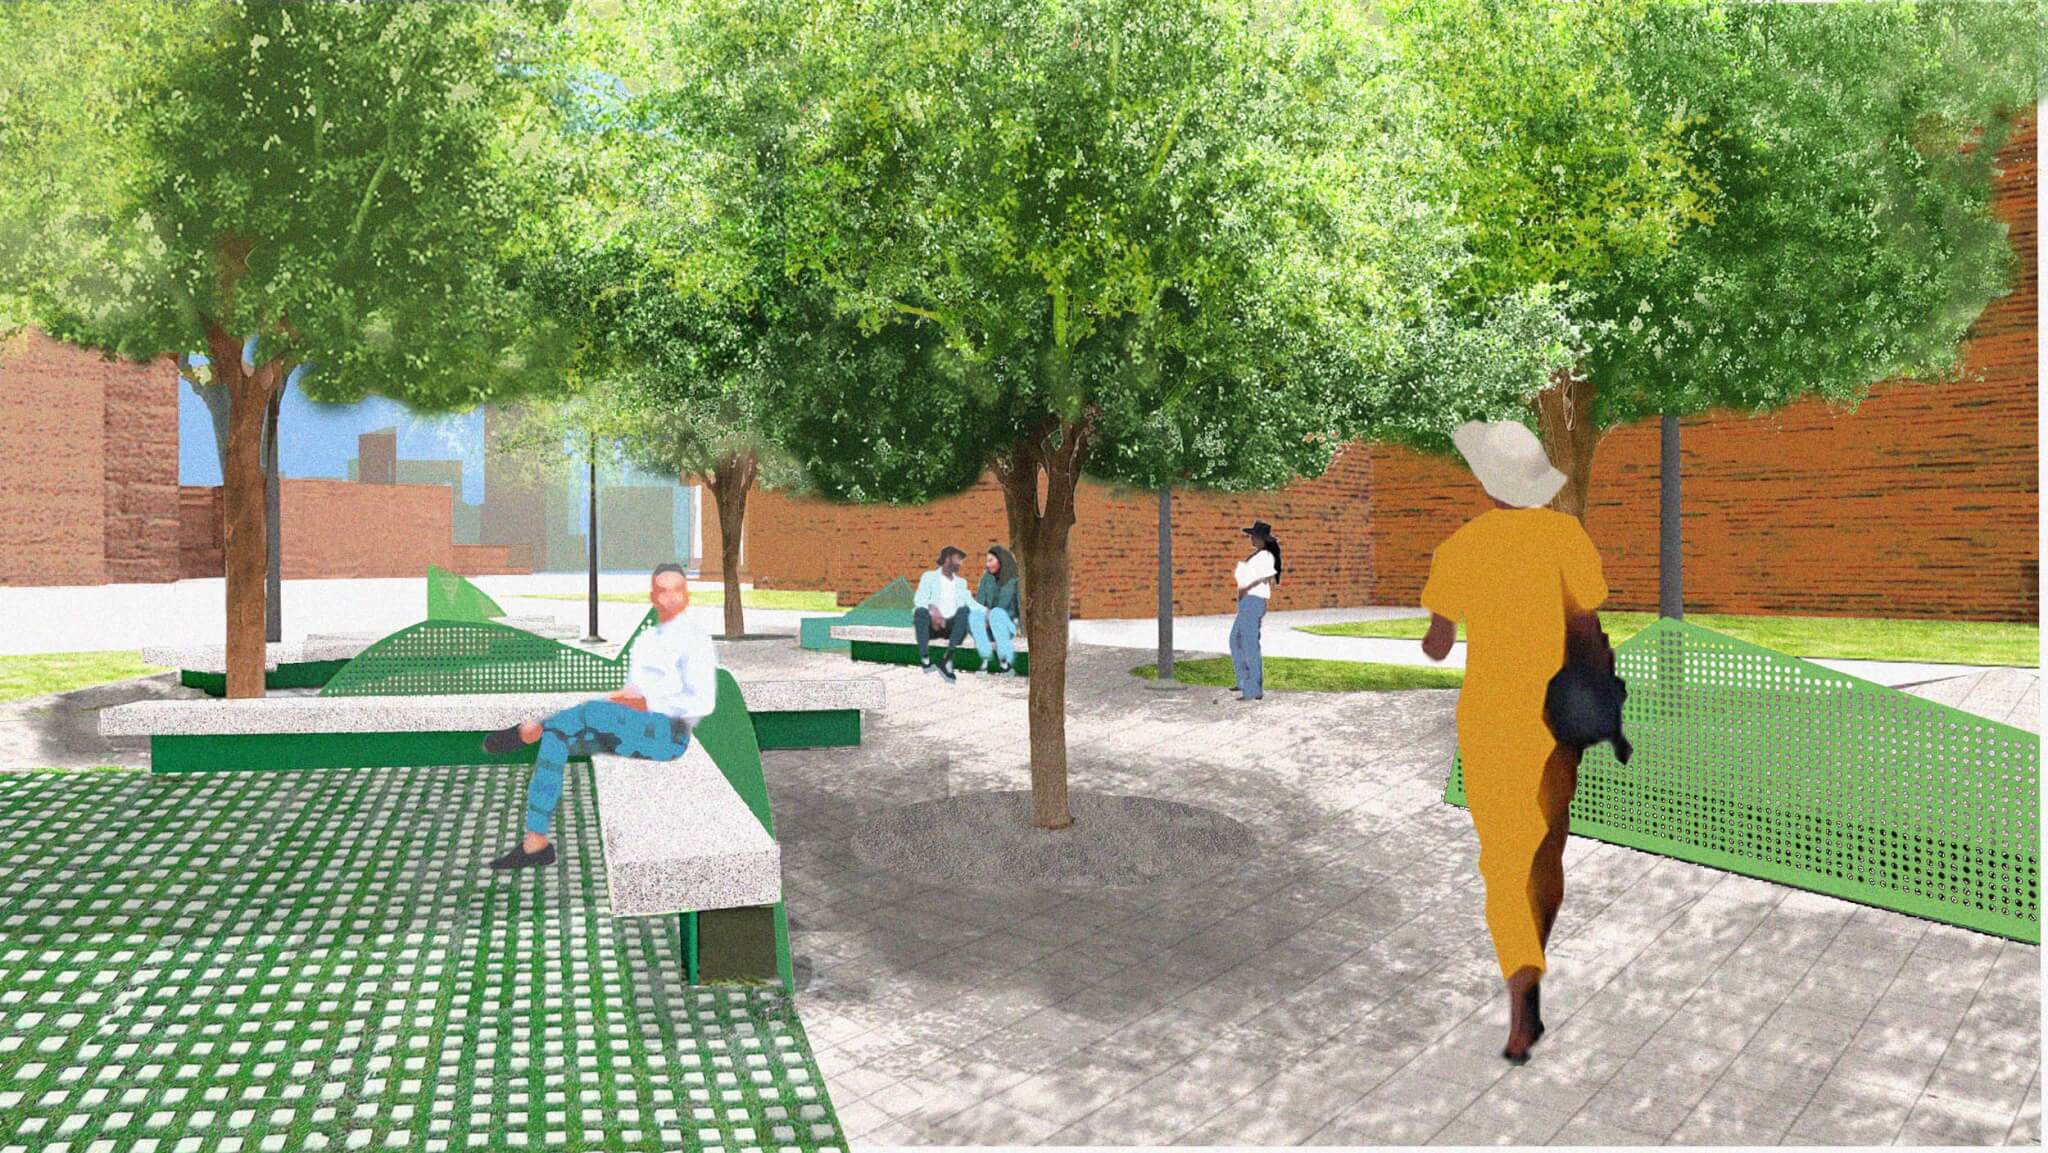 rendering of park space with people and trees